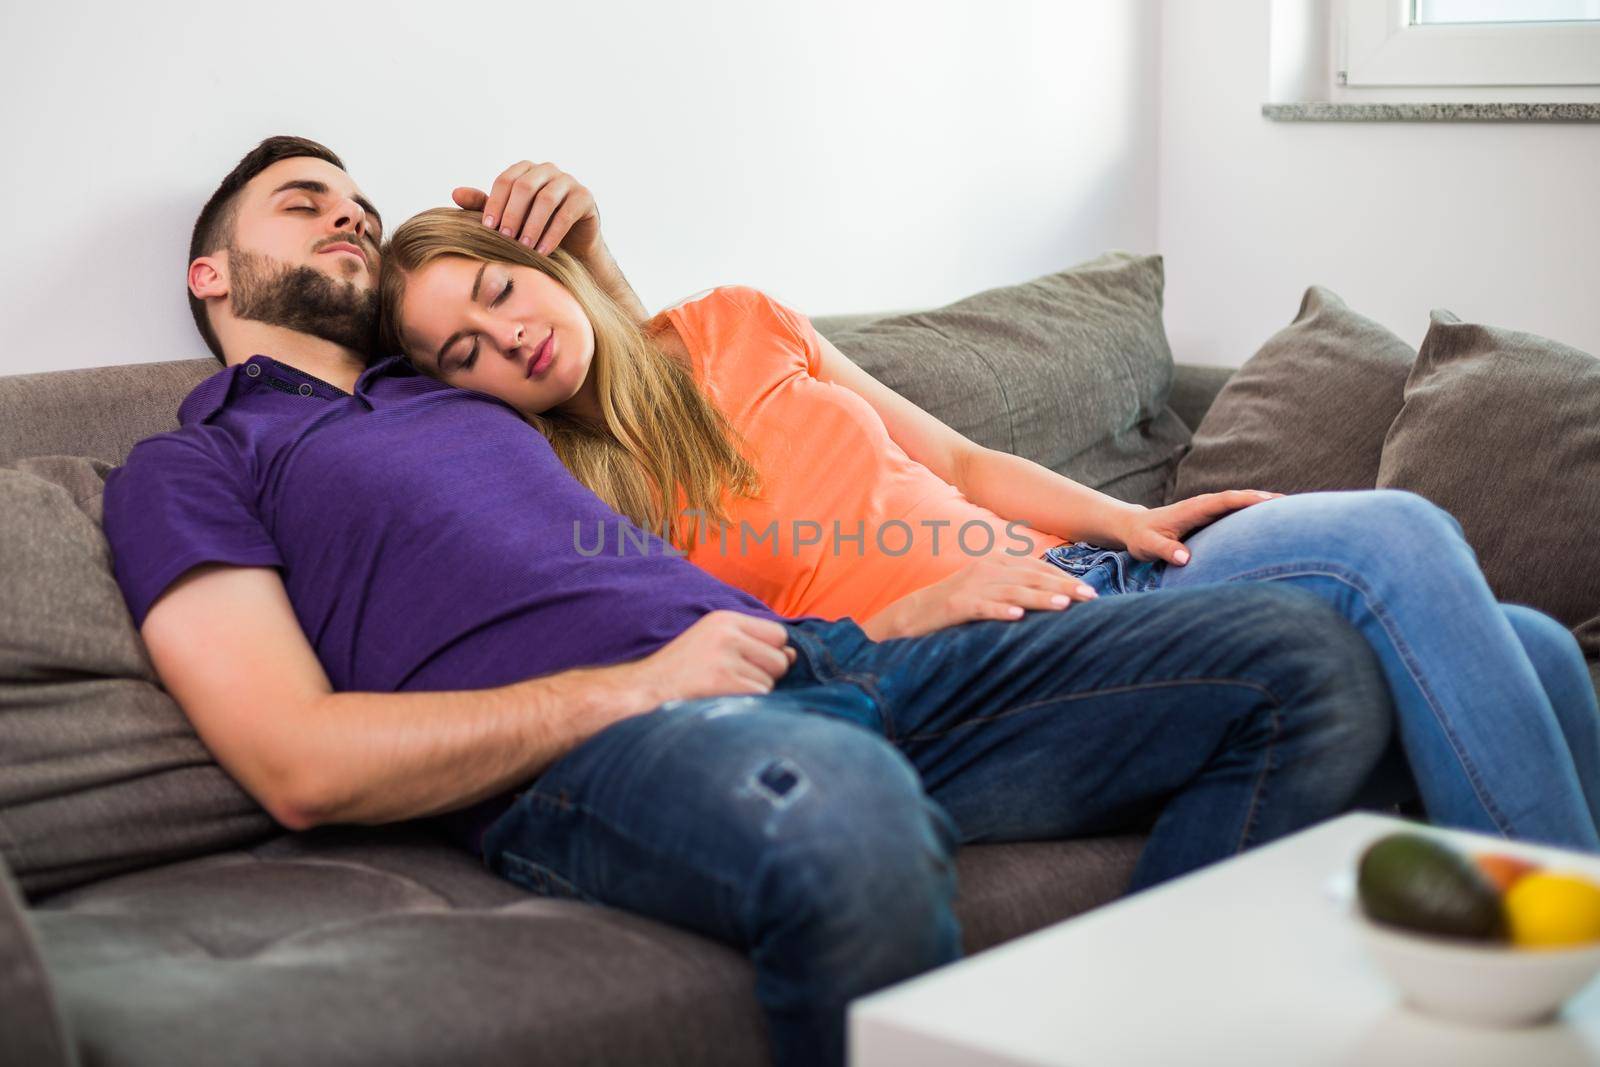 Couple enjoys napping together on sofa while they spending time together at their home.